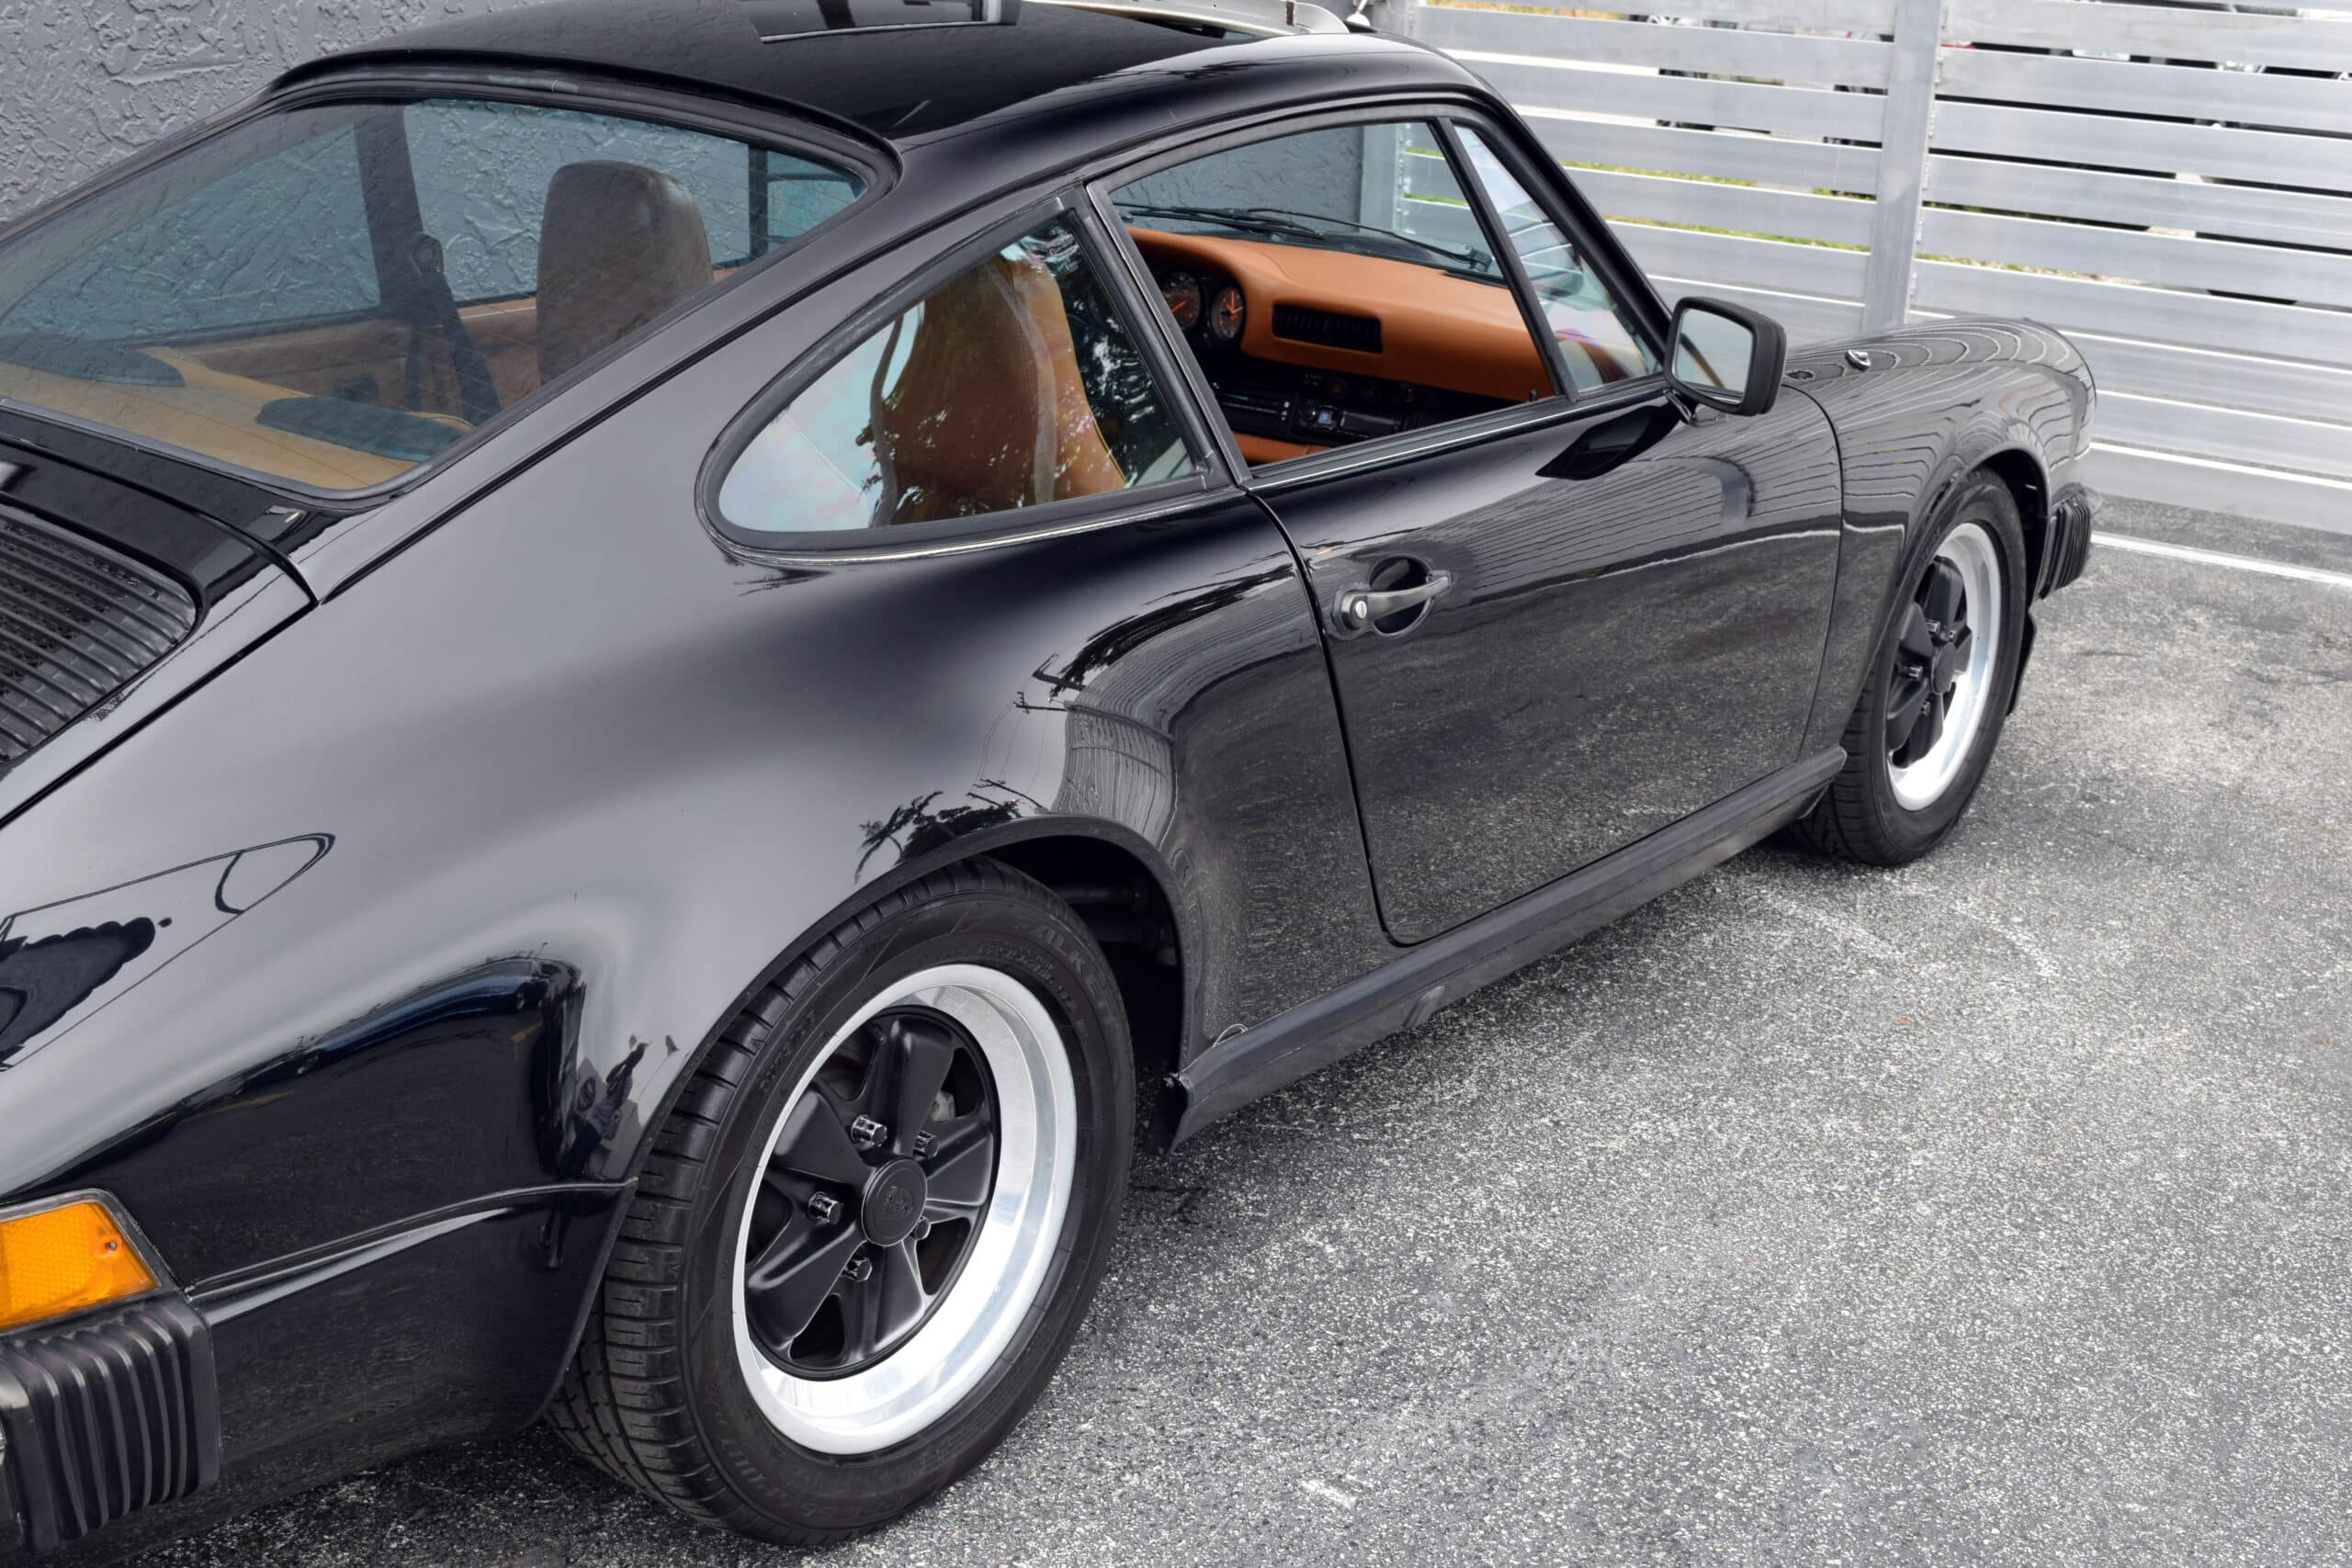 1983 Porsche 911 911 SC One owner for most of its life, Black California Customs Plates, CA Smog valid